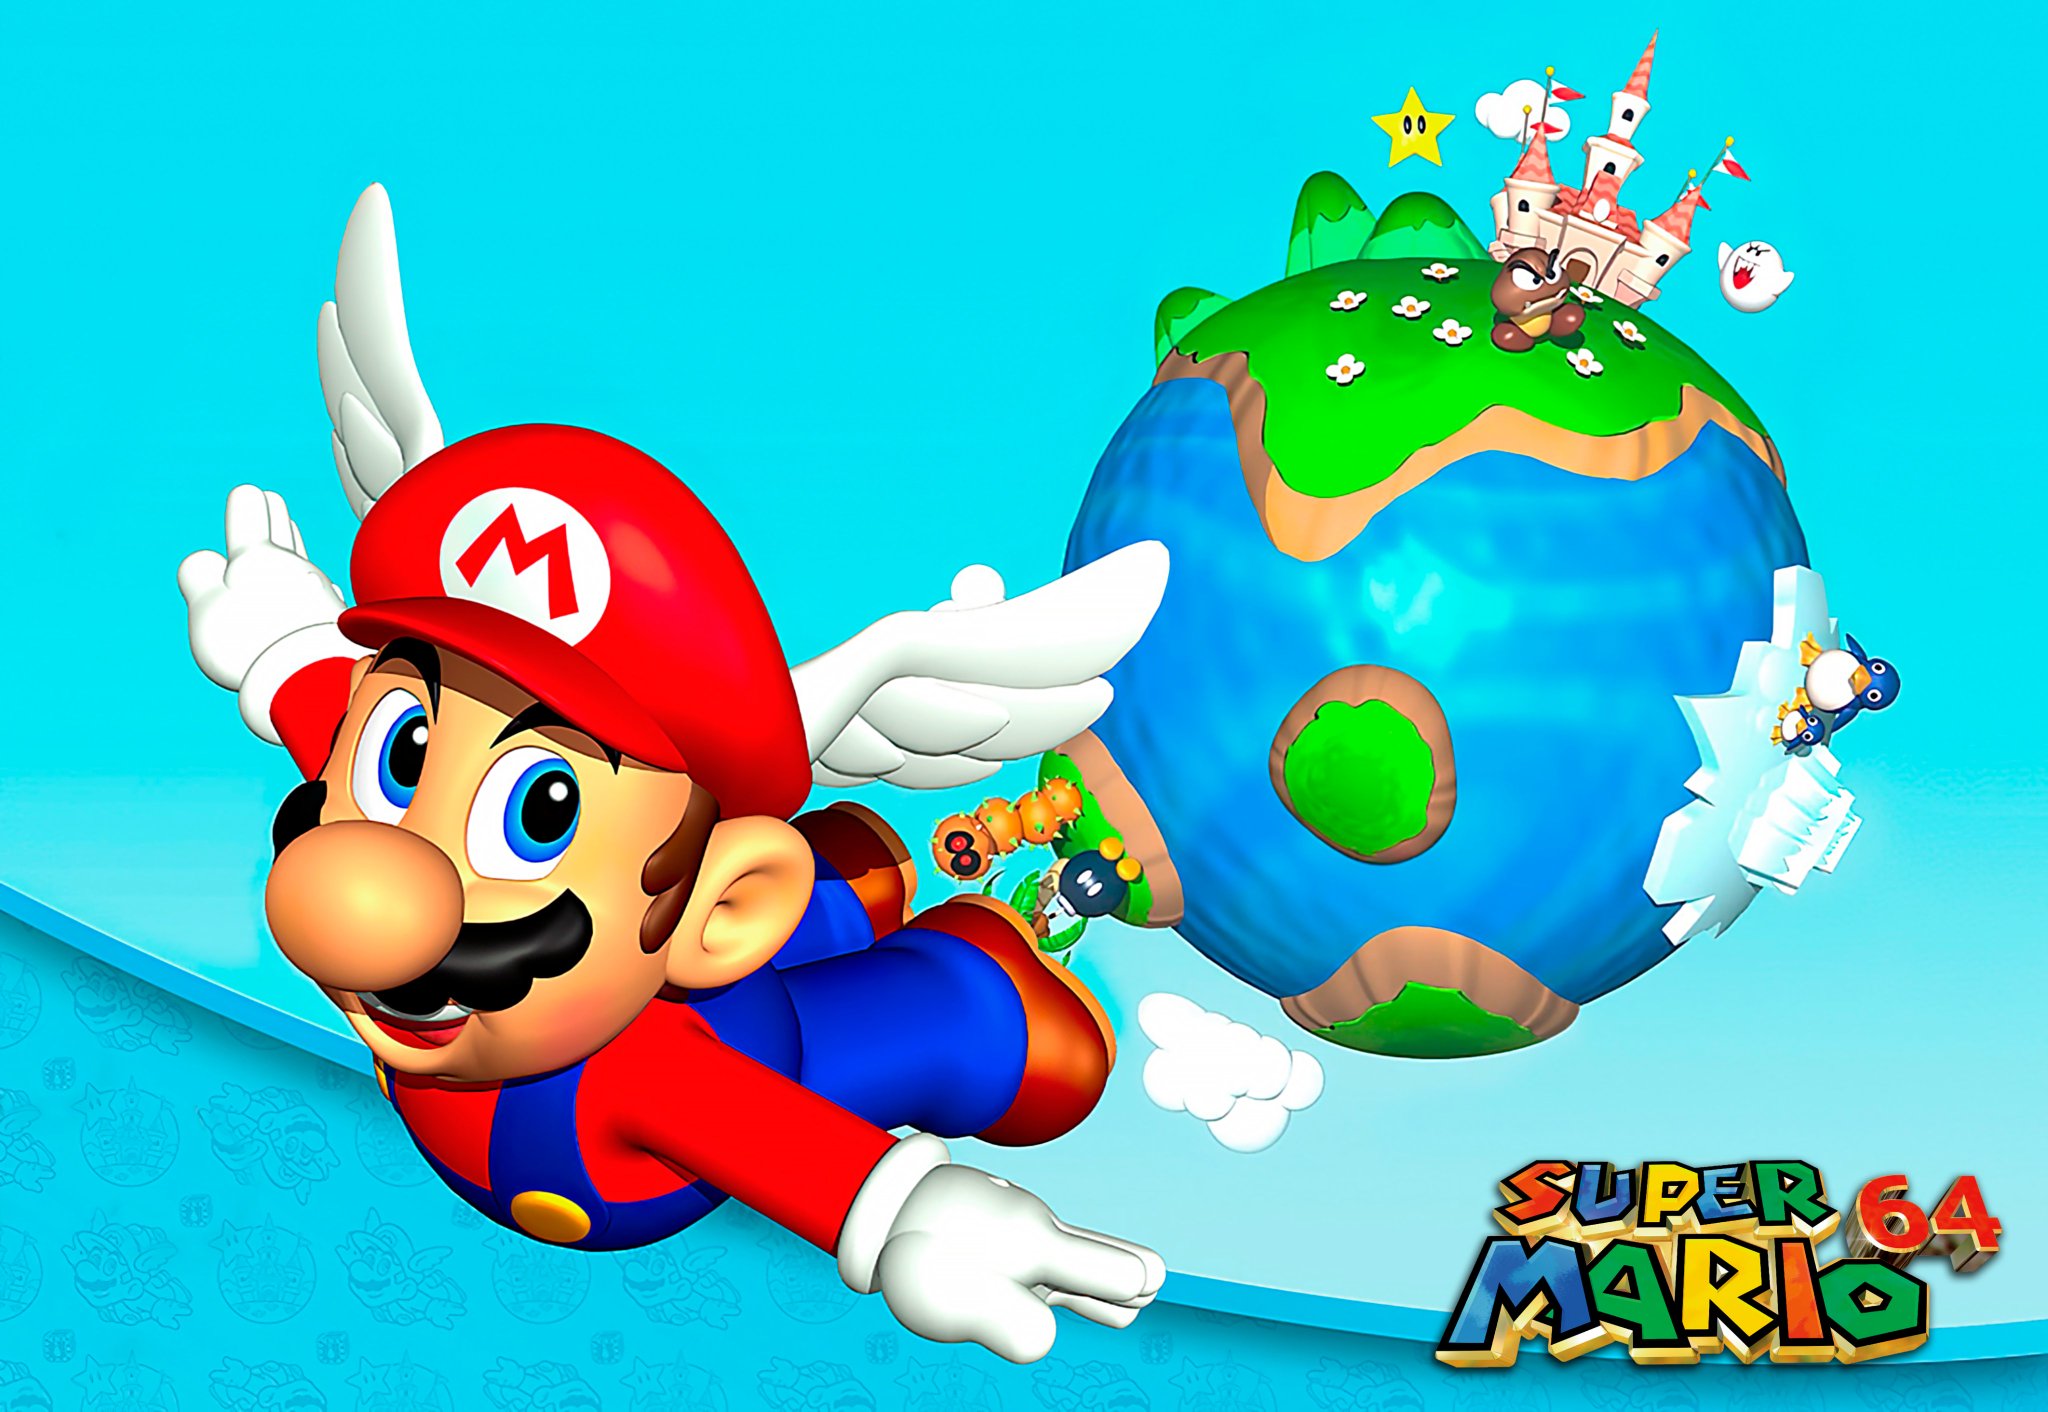 Kurko Mods on Twitter Super Mario 64 Wallpaper Upscaled and restored  in photoshop Comparison and download in comments SuperMario64  Nintendo64 render httpstcoUK0vouIY4J  Twitter